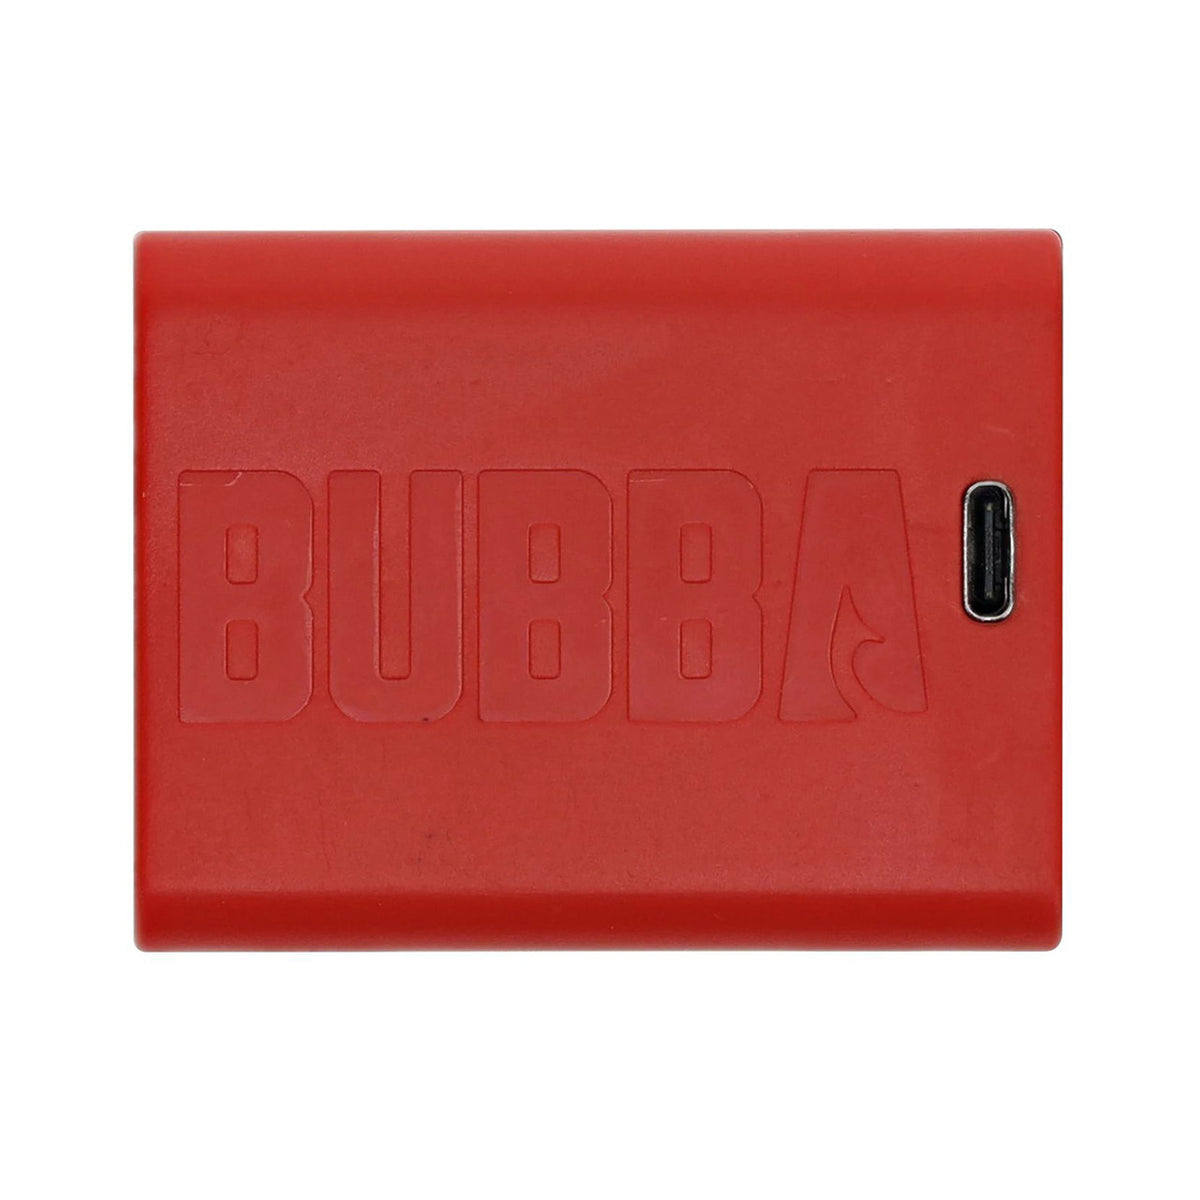 Bubba Smart Scale Lithium Ion Rechargeable Battery - LOTWSHQ